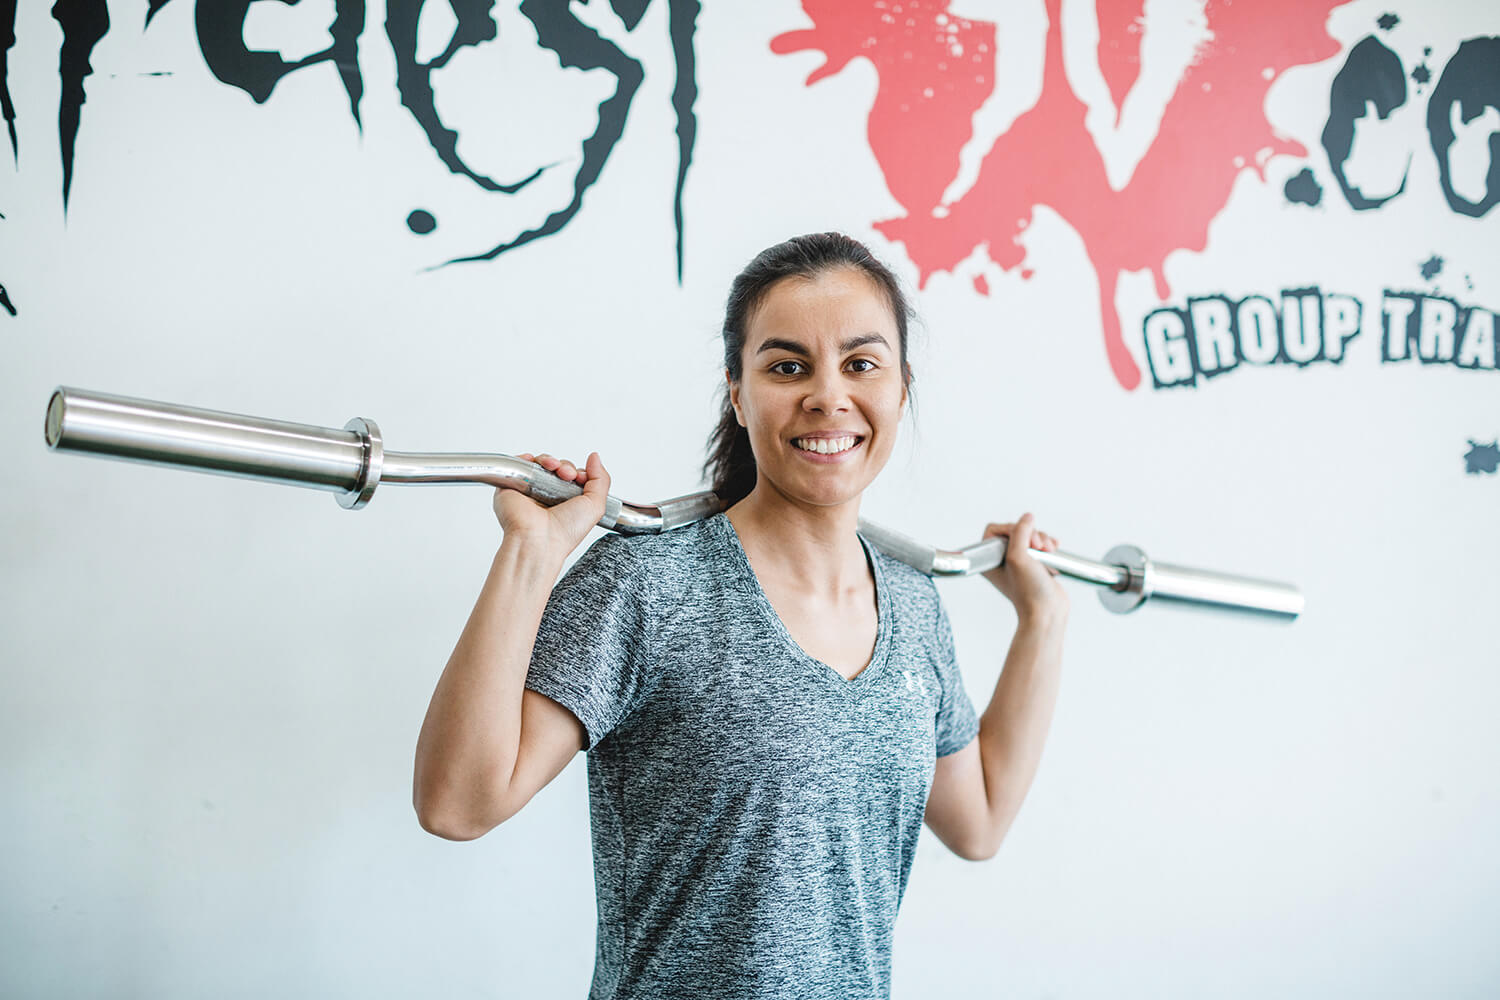 Sofia Hardest 30 high intensiv training instructor with barbells